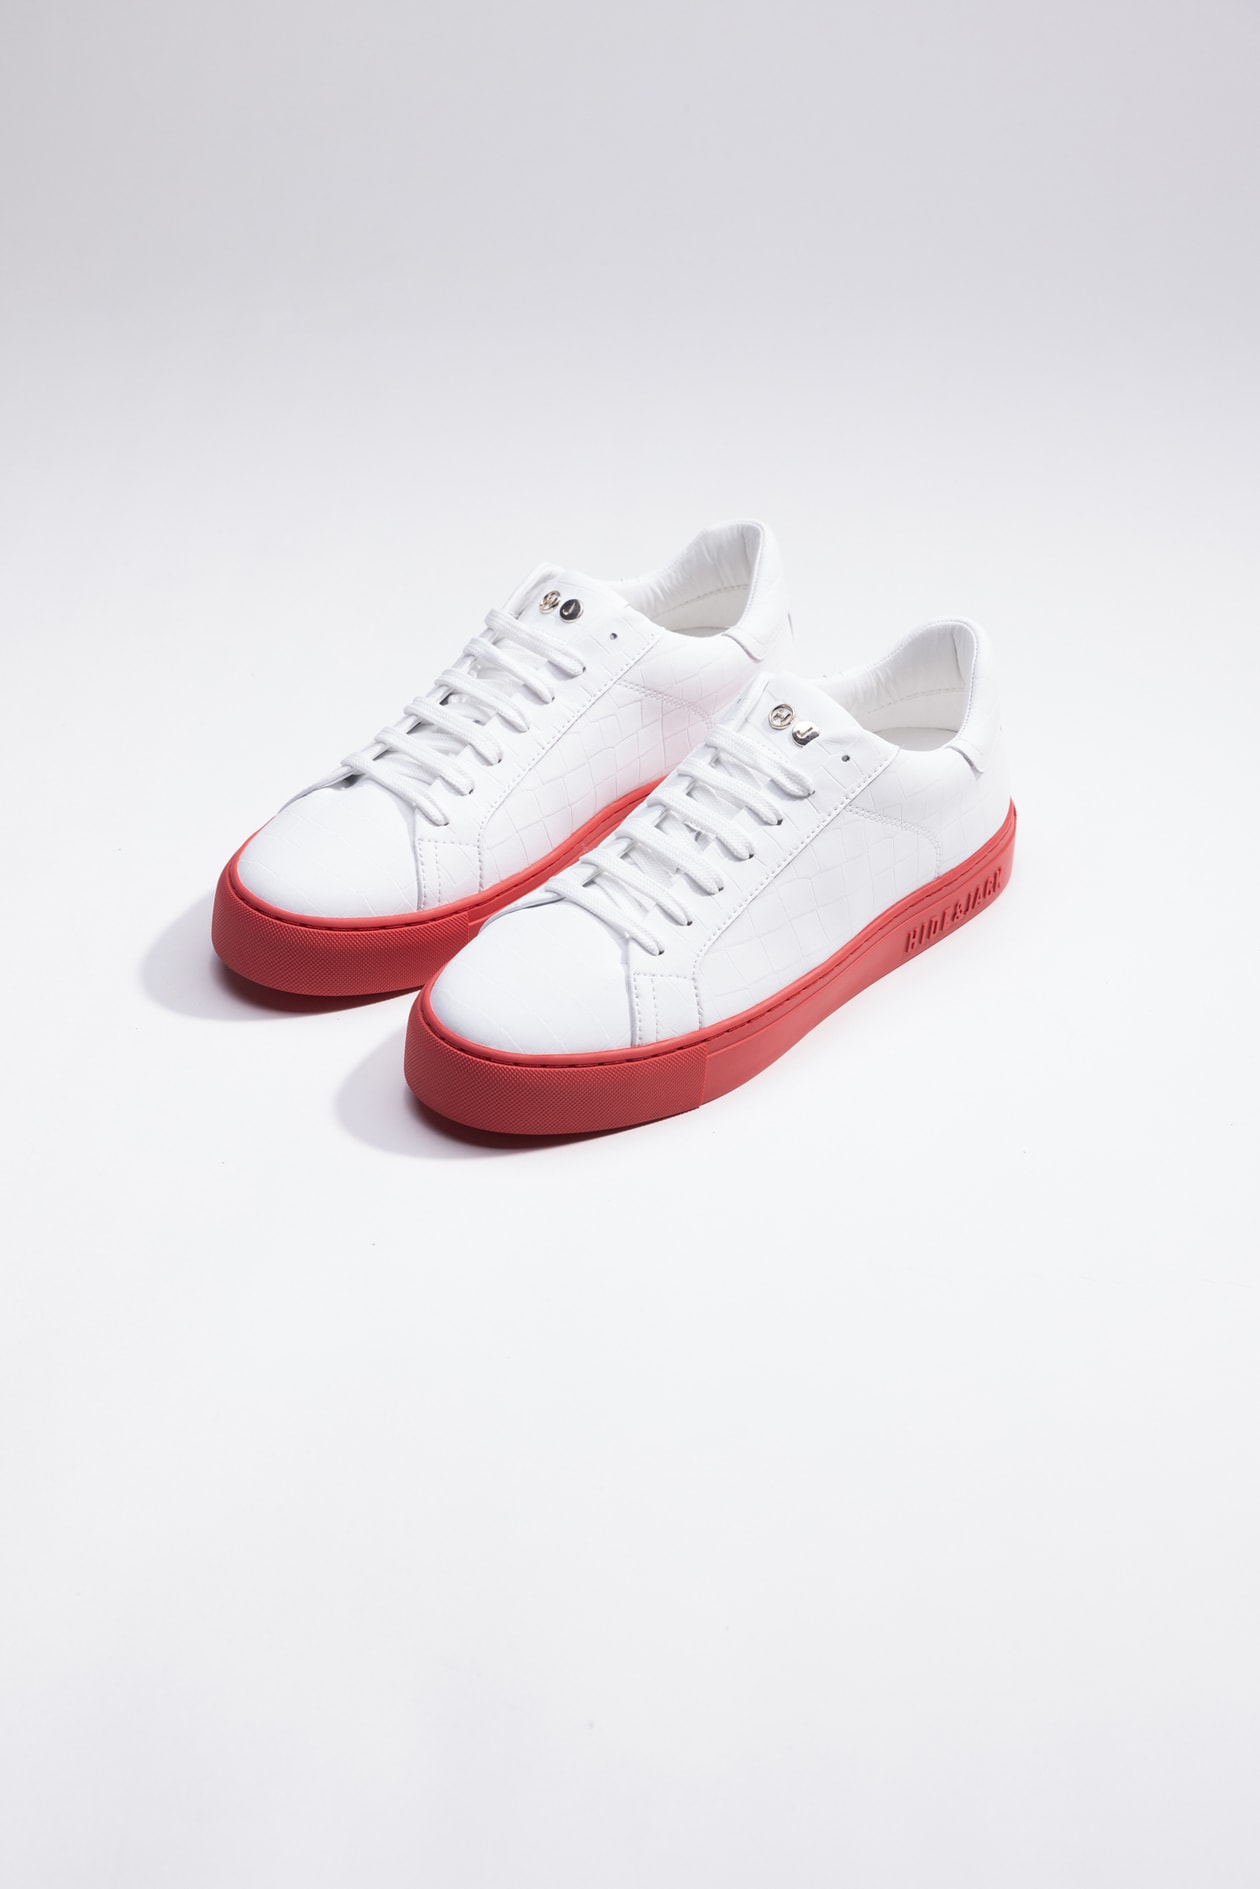 Hide&amp;jack Low Top Sneaker - Essence Tuscany White Red